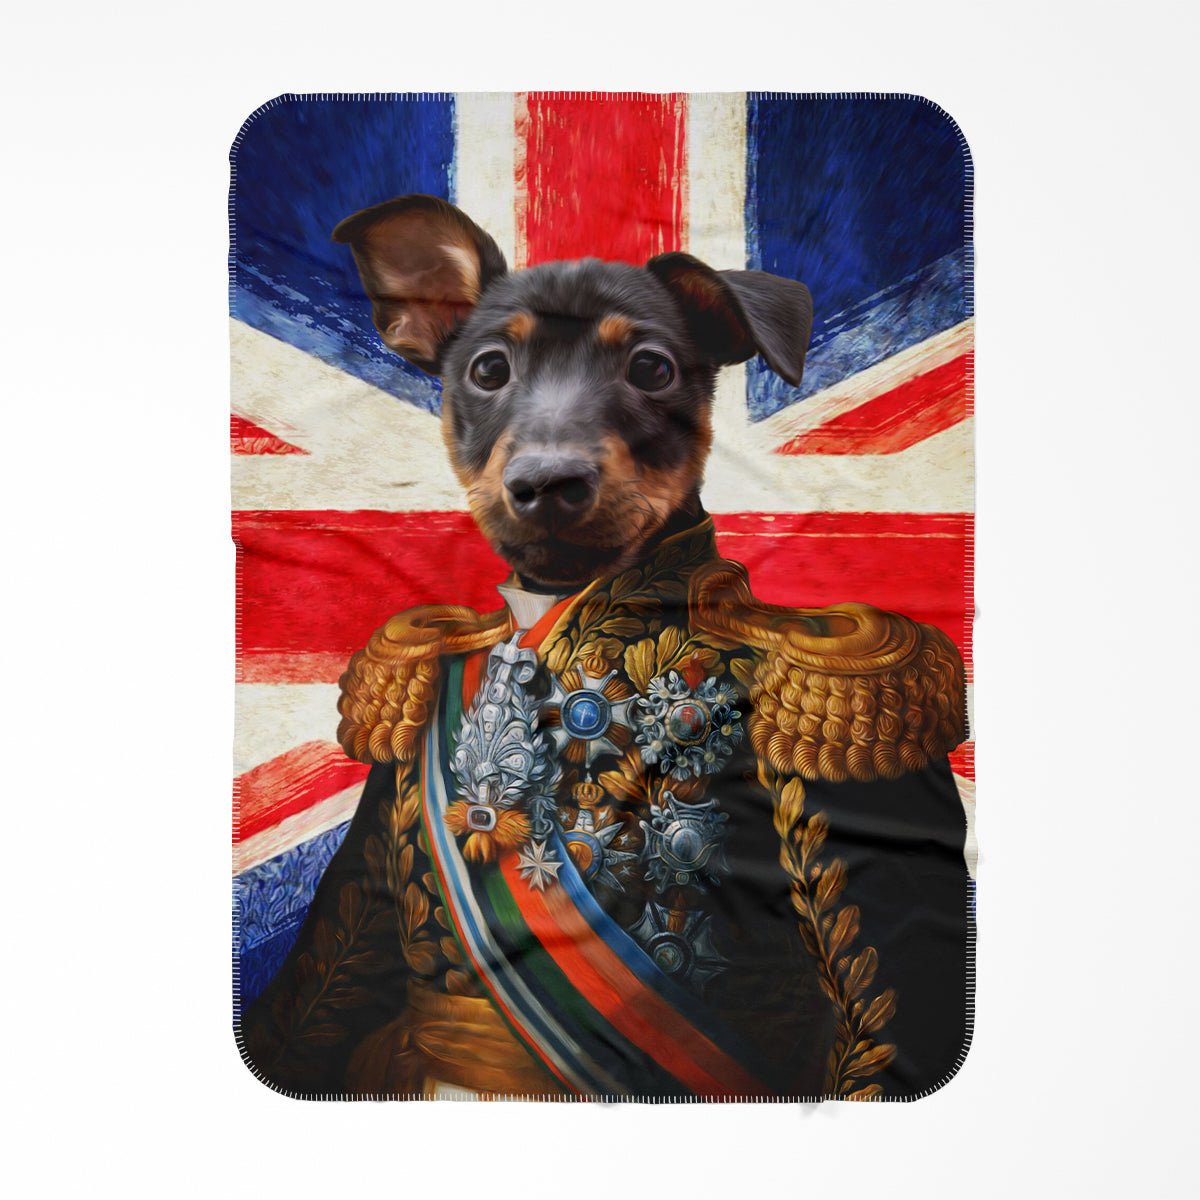 The First Lieutenant British Flag Edition: Custom Pet Blanket - Paw & Glory - #pet portraits# - #dog portraits# - #pet portraits uk#Paw and glory, Pet portraits blanket,put your animal on a blanket, pet blanket uk, fleece blanket with picture, printed dog blanket, cat on a blanket